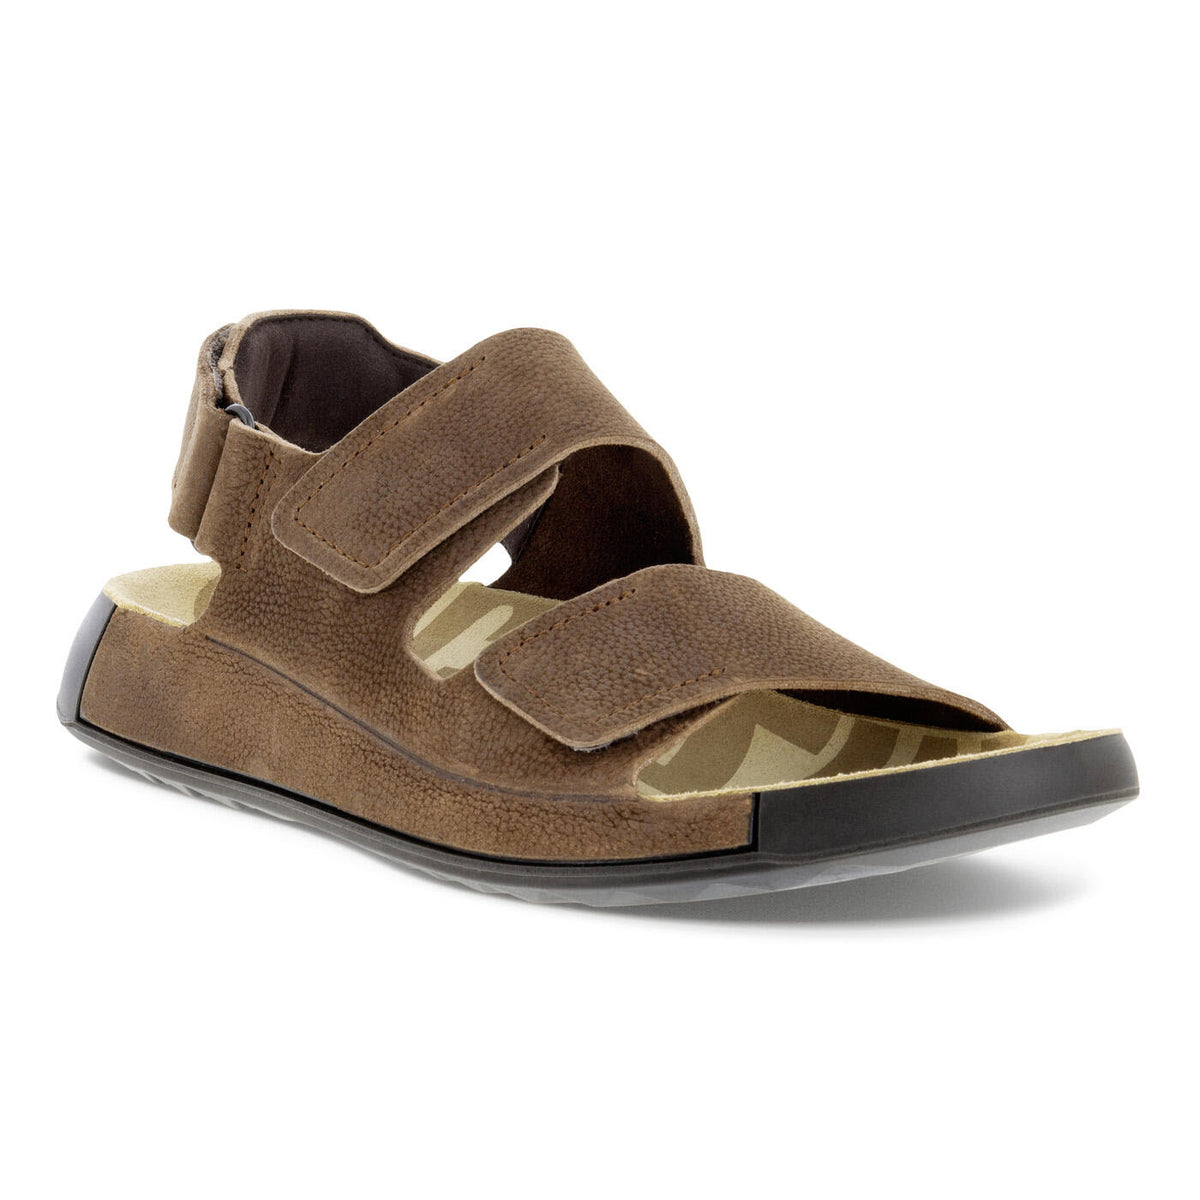 A brown orthopedic sandal with adjustable straps and a supportive footbed, isolated on a white background from Ecco.